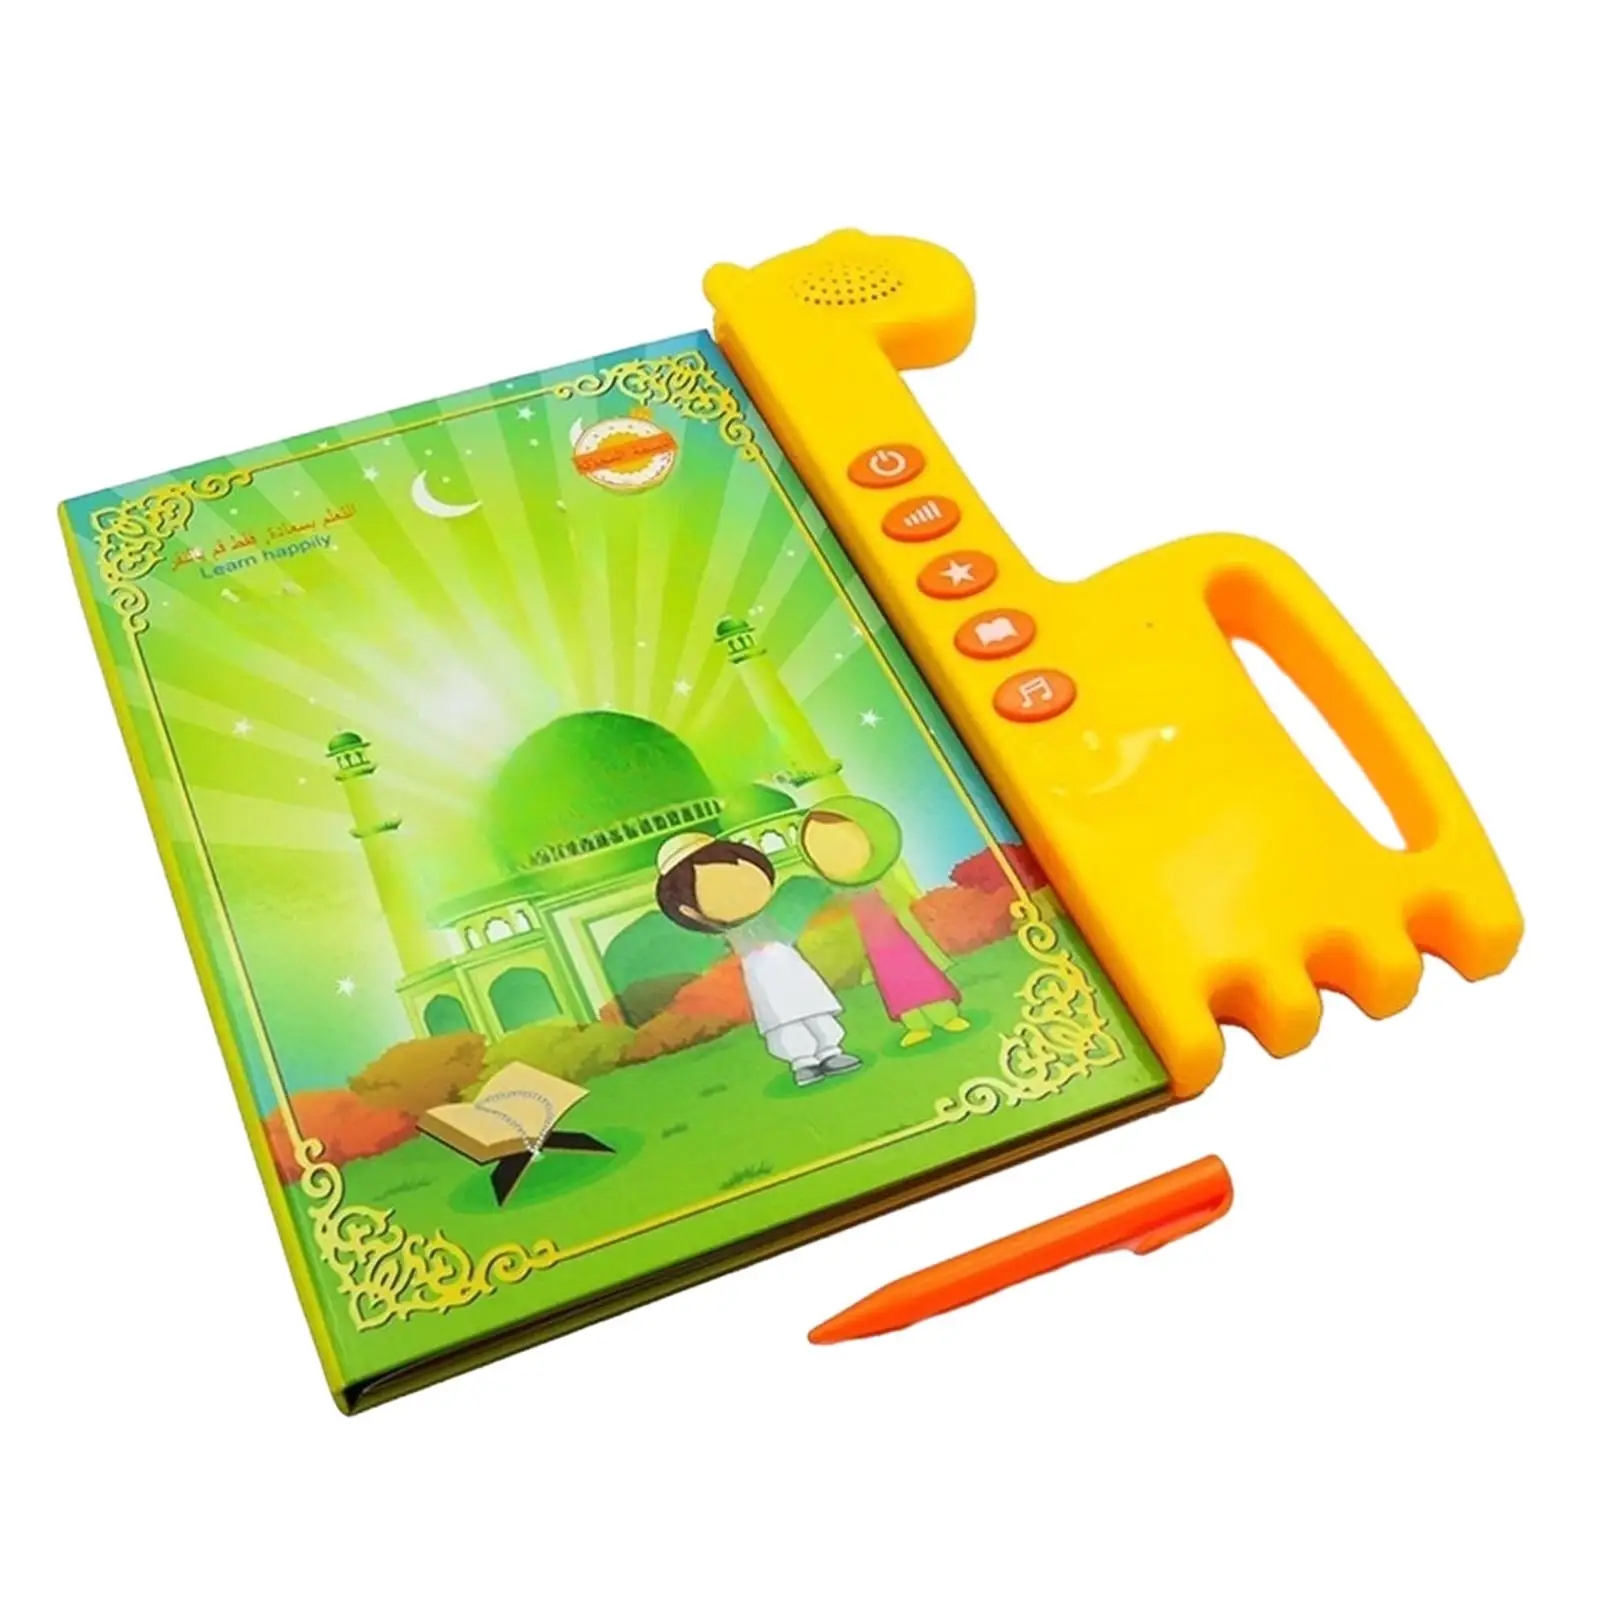 Arabic Learning Book Learning Toy Developmental Toys Portable Teaching Aids Audio Book Multifunction for Kids Girls Bithday Gift